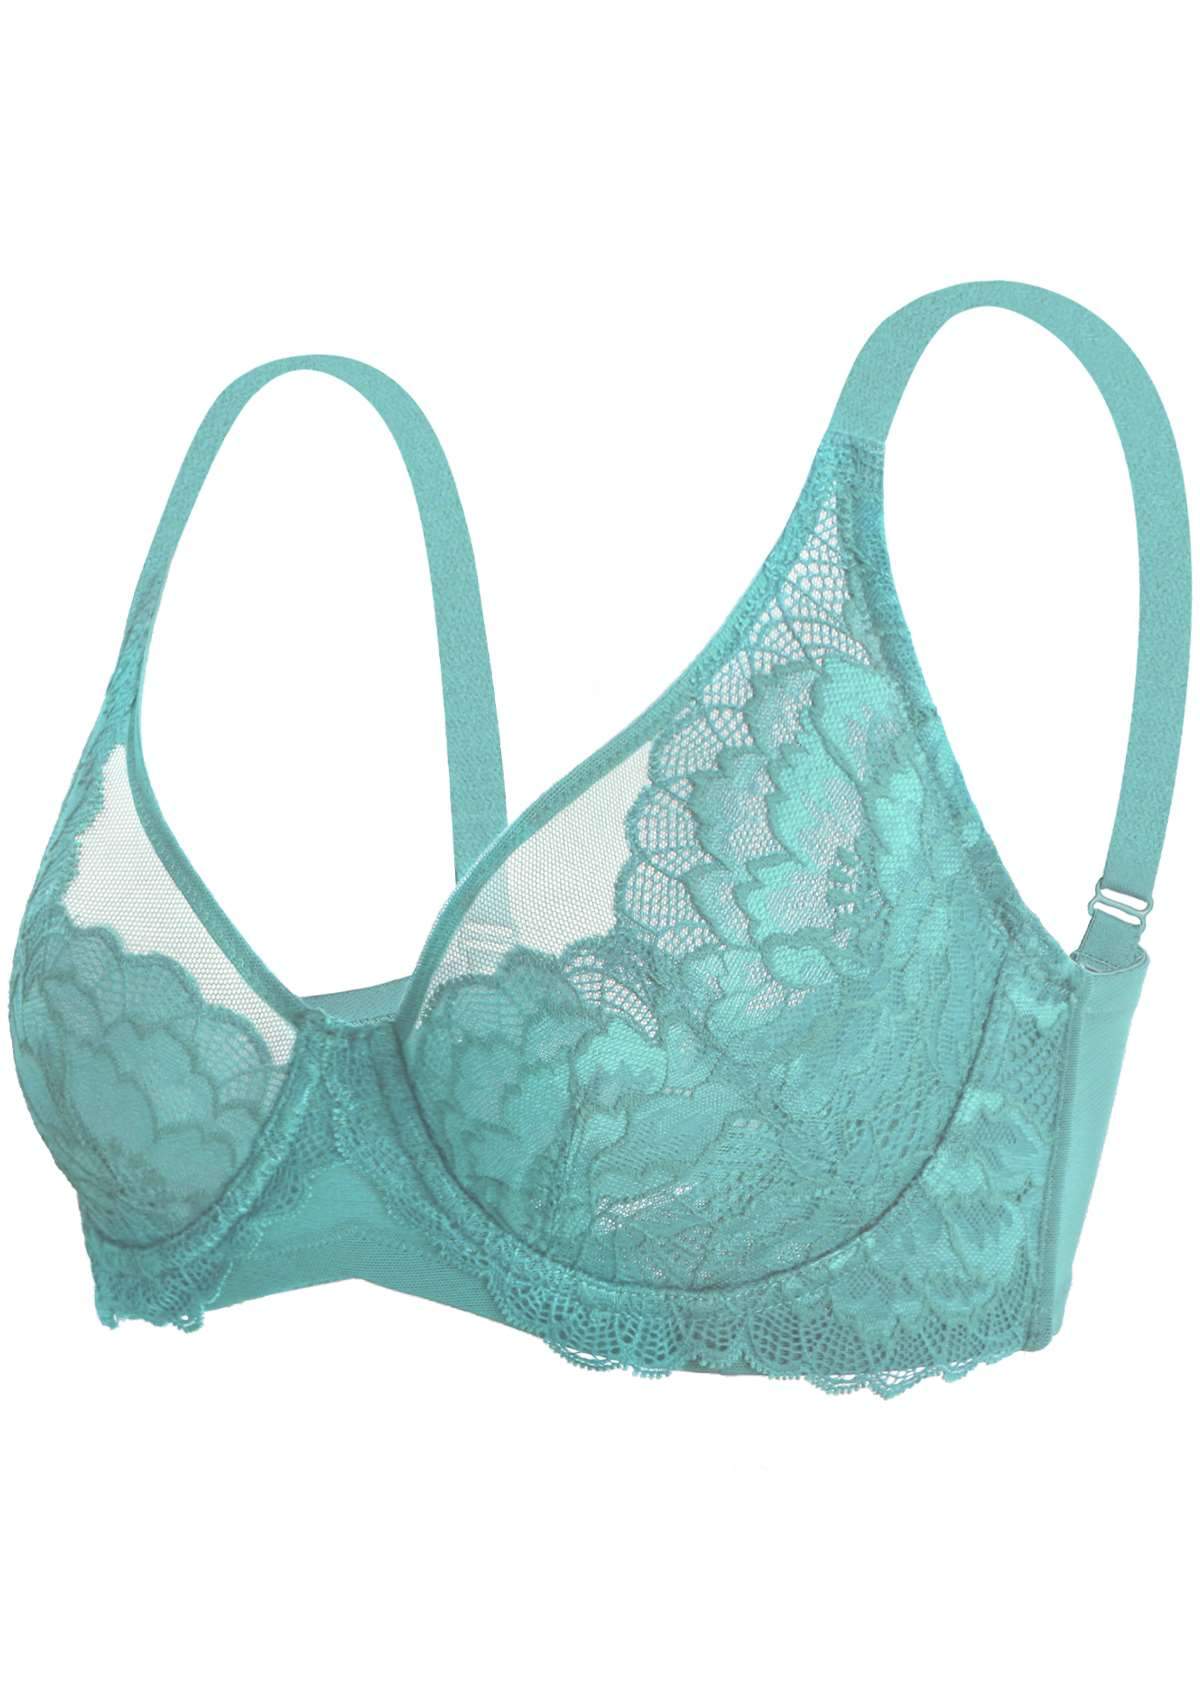 HSIA Paeonia Lace Full Coverage Underwire Non-Padded Uplifting Bra - Light Coral / 38 / DDD/F